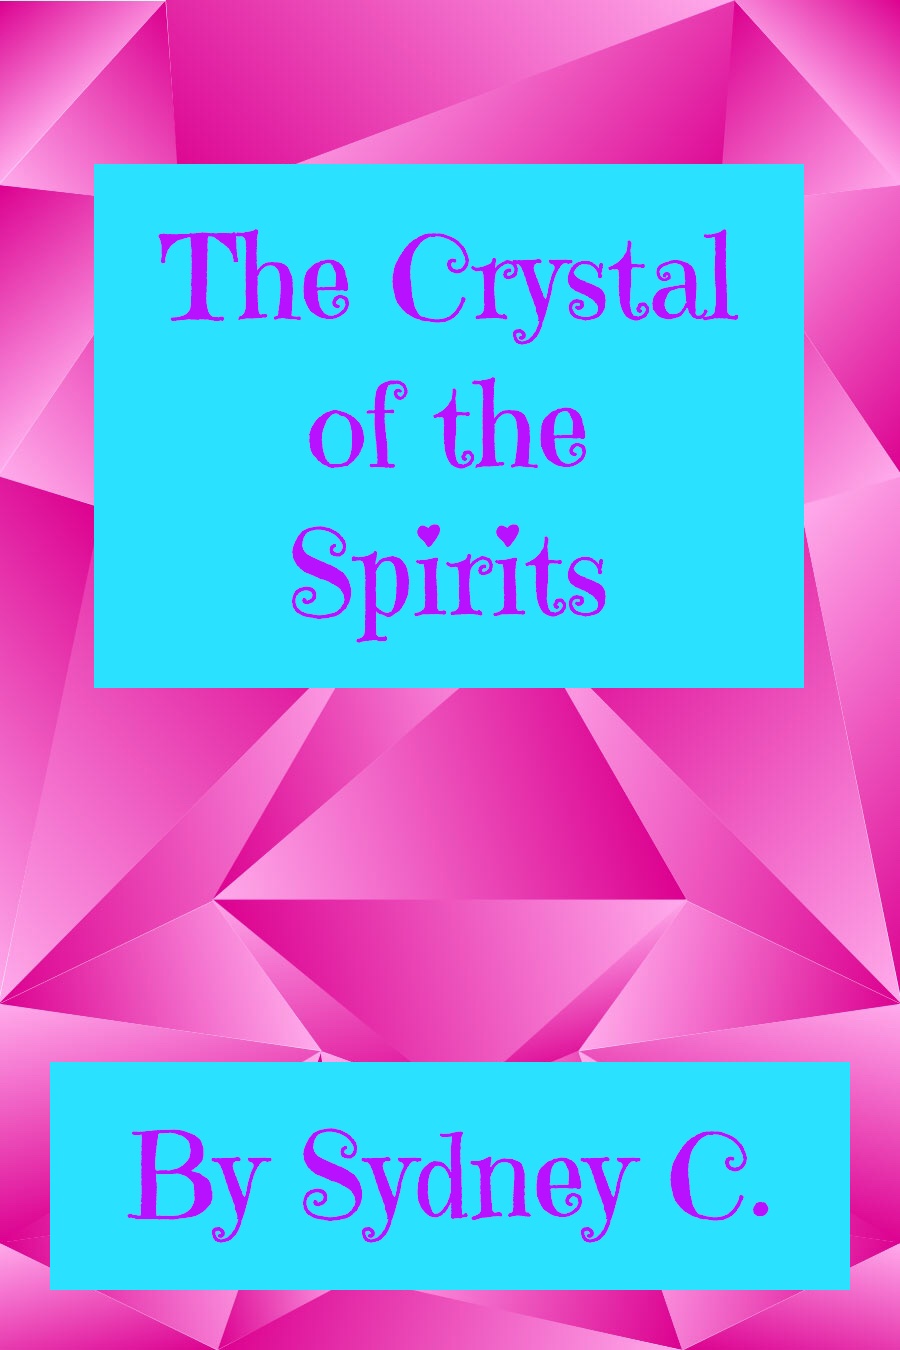 The Crystal of the Spirits